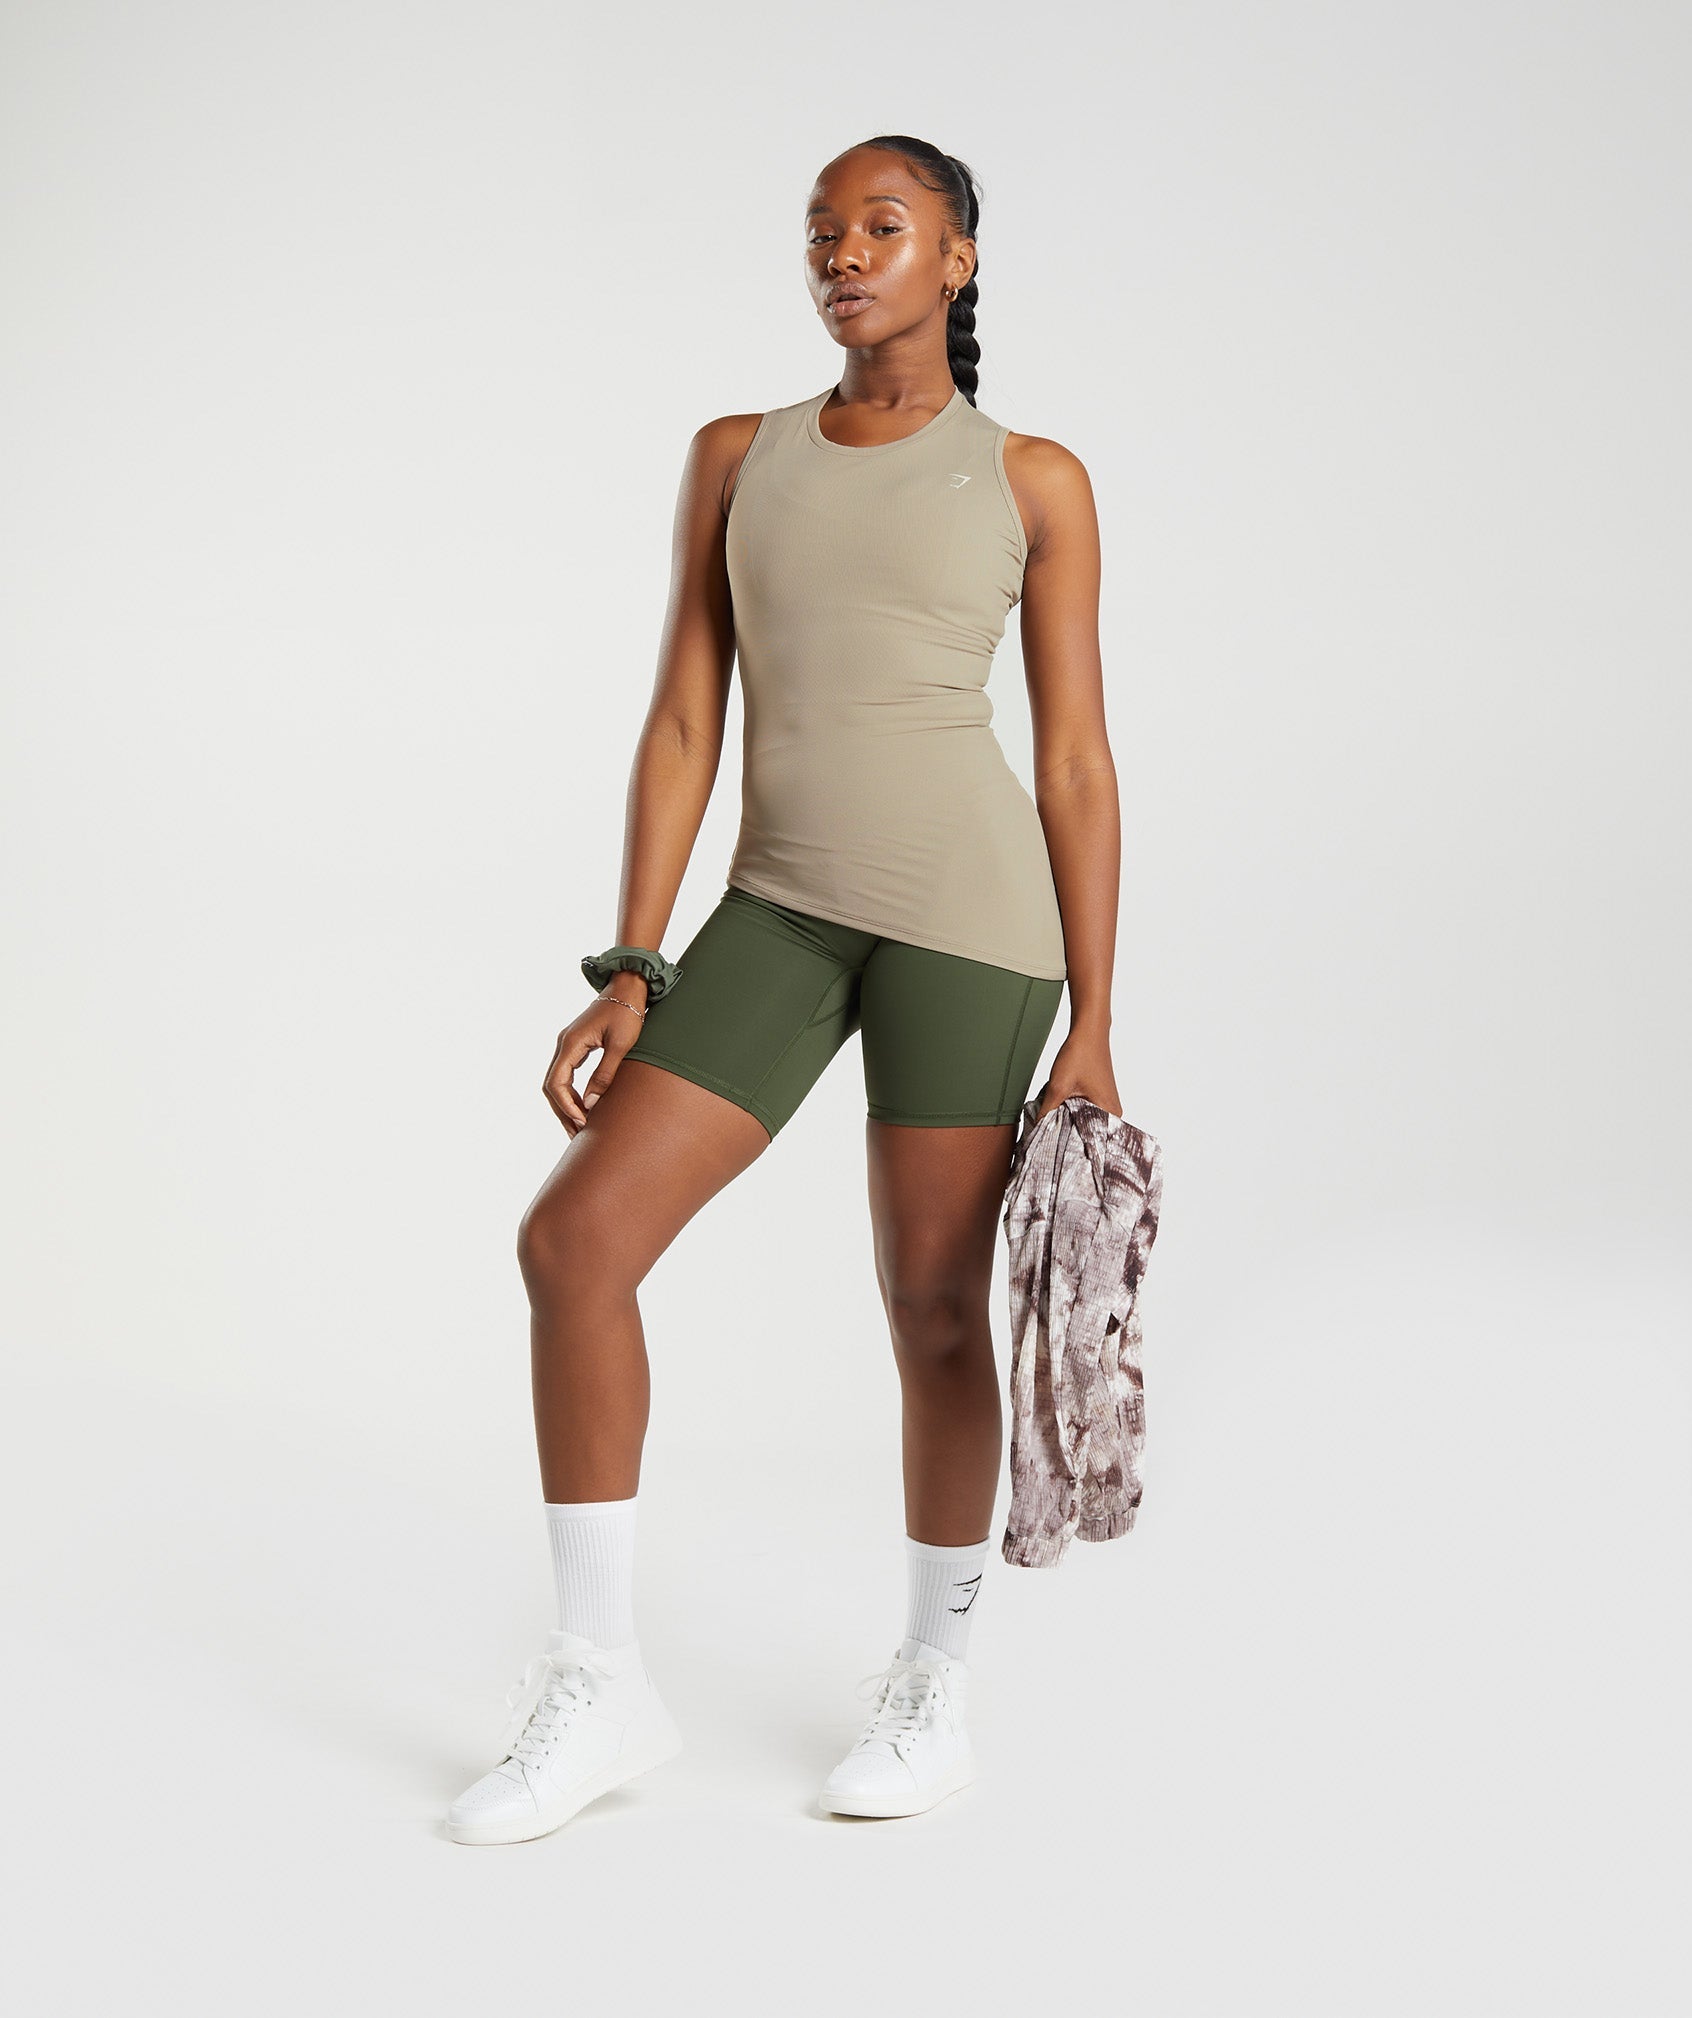 Elevate Asymmetric Tank in Cement Brown - view 3